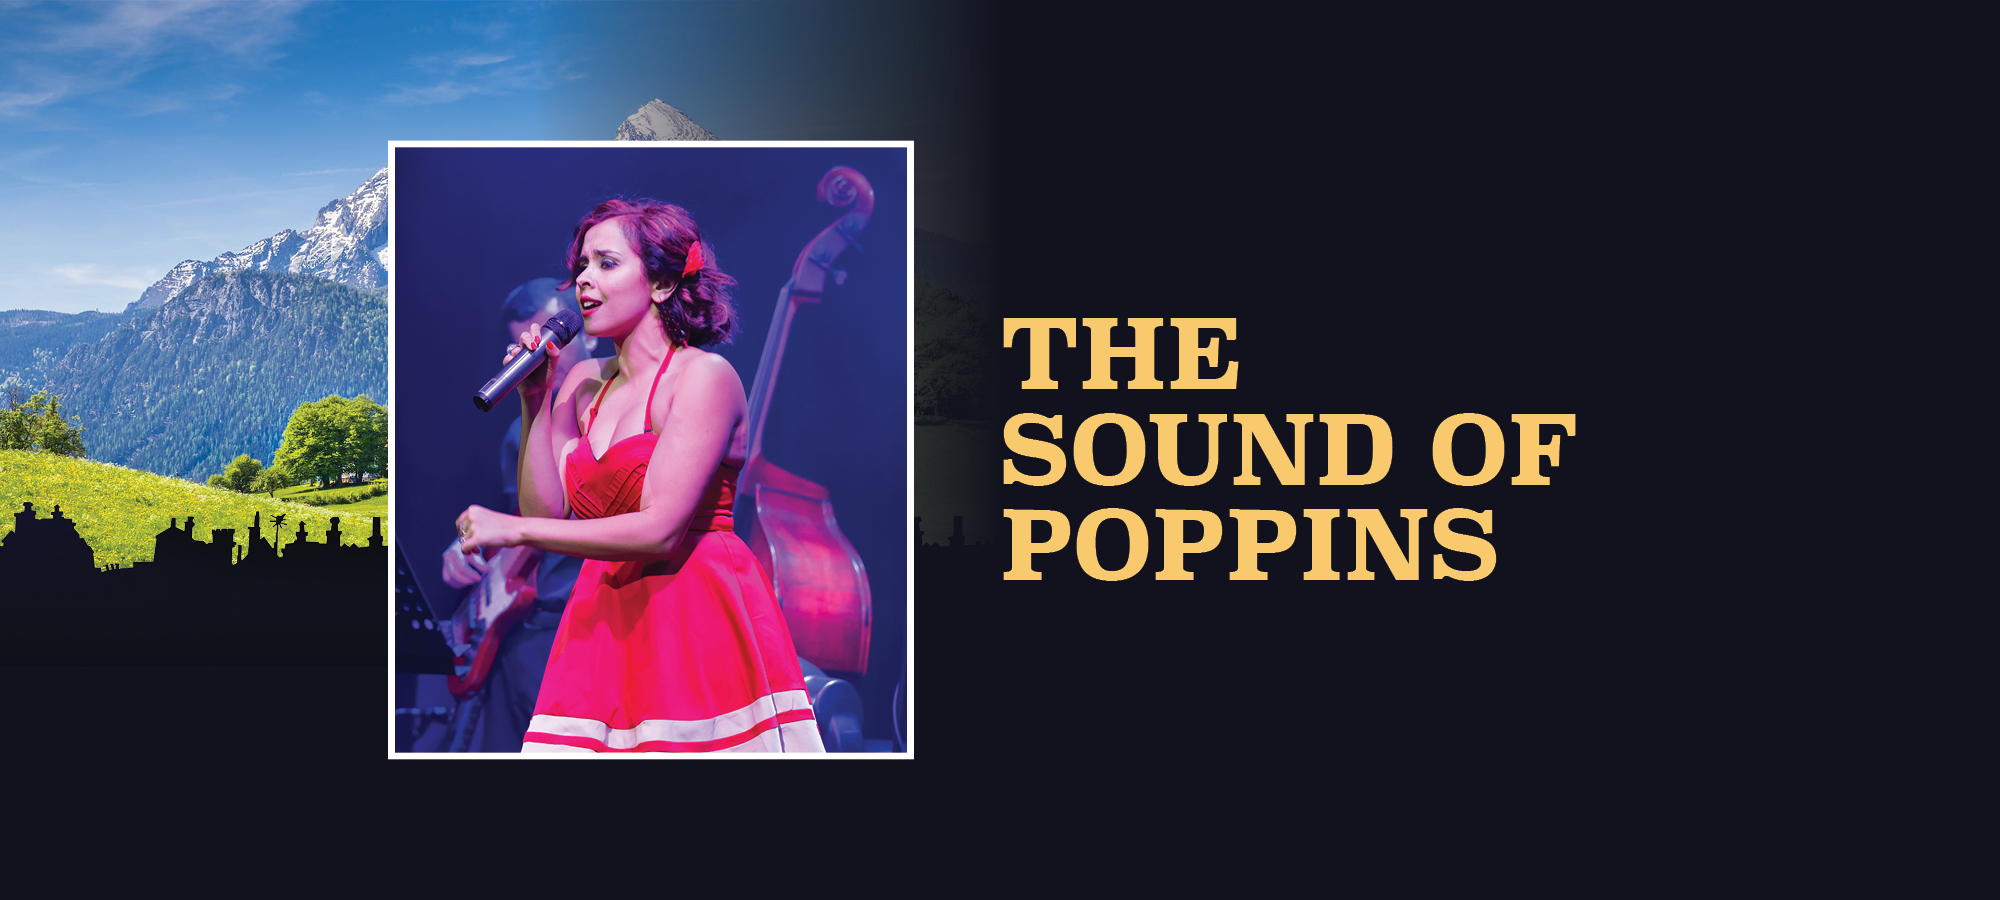 The Sound of Poppins